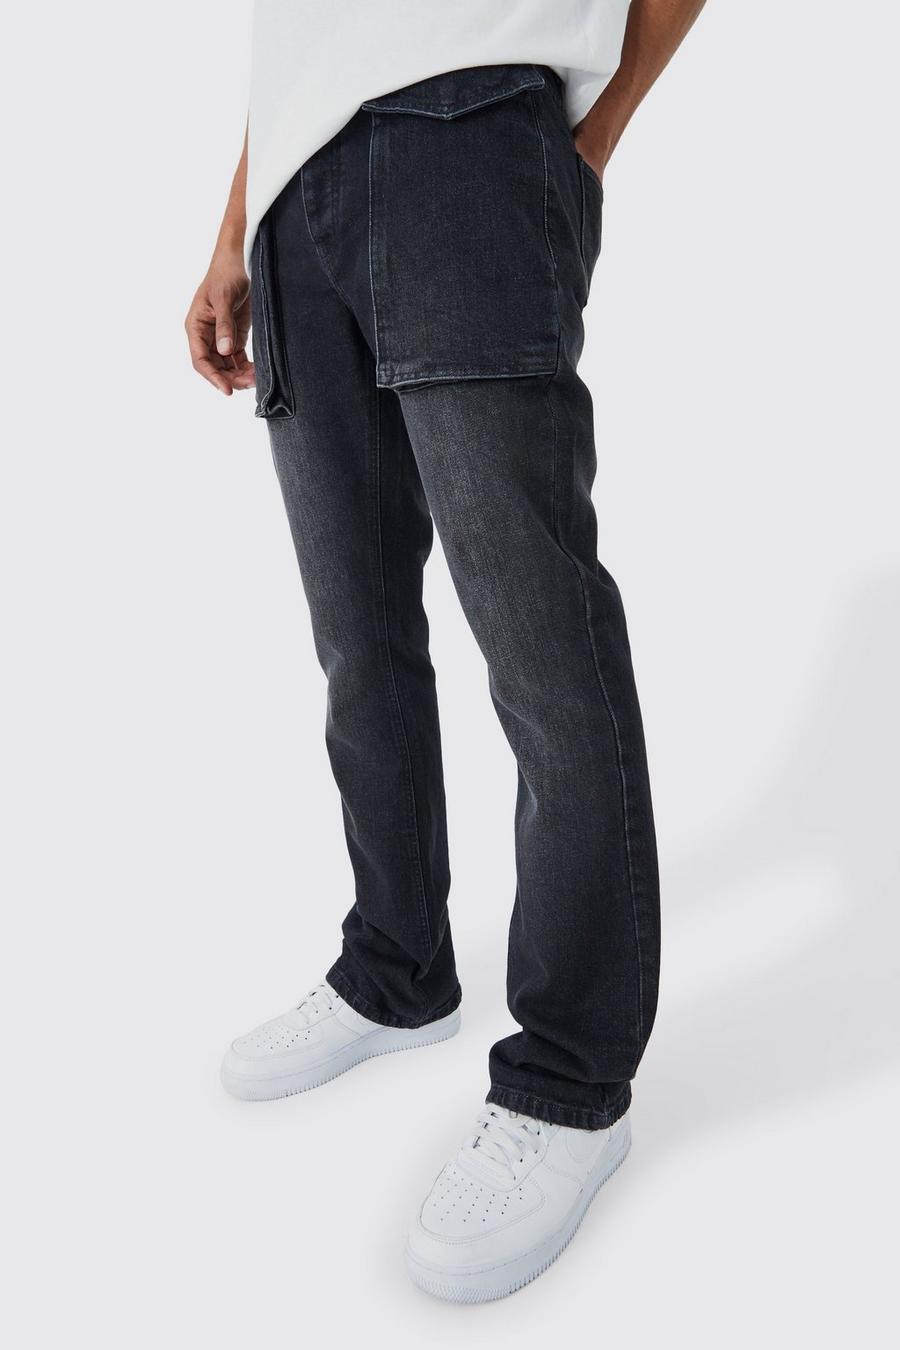 Slim Rigid Flare 3d Pocket Jeans In Charcoal